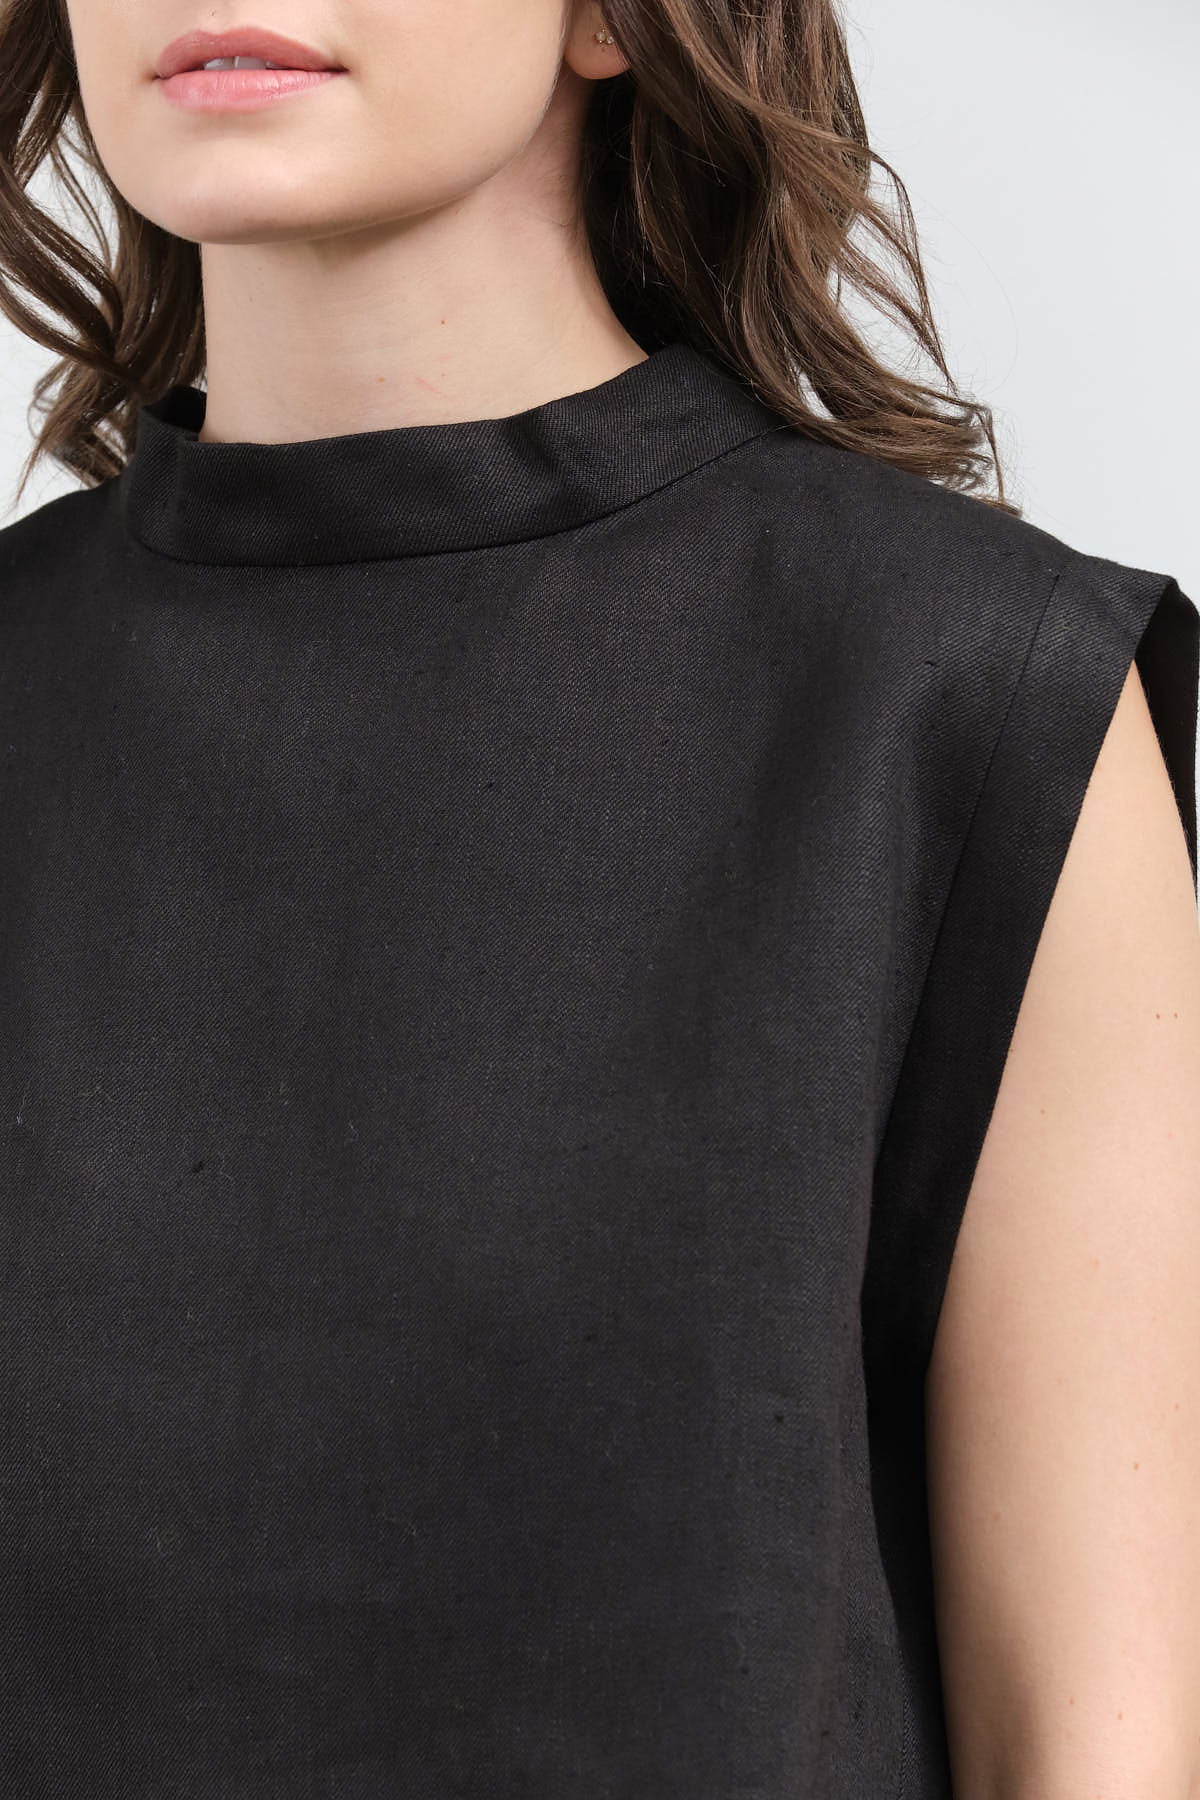 Collar view of Bacchus Top in Black